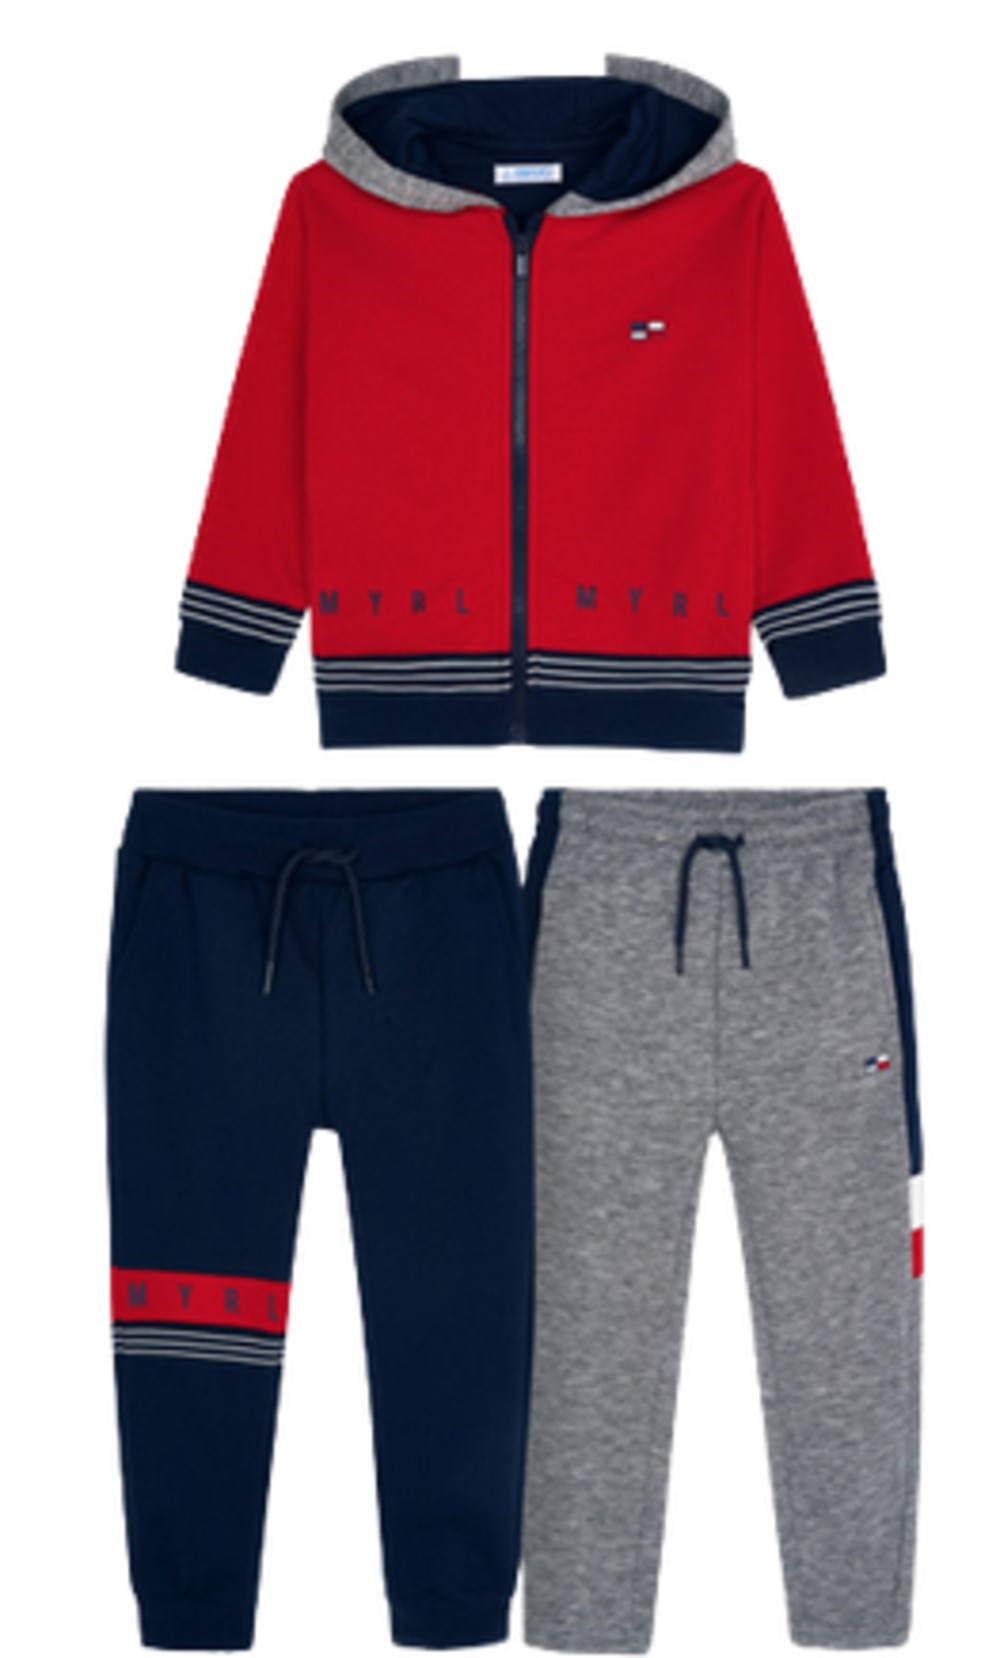 MAYORAL 4832 BOYS RED, WHITE, BLUE AND GRAY 3 PIECE FLEECE TRACK SUIT